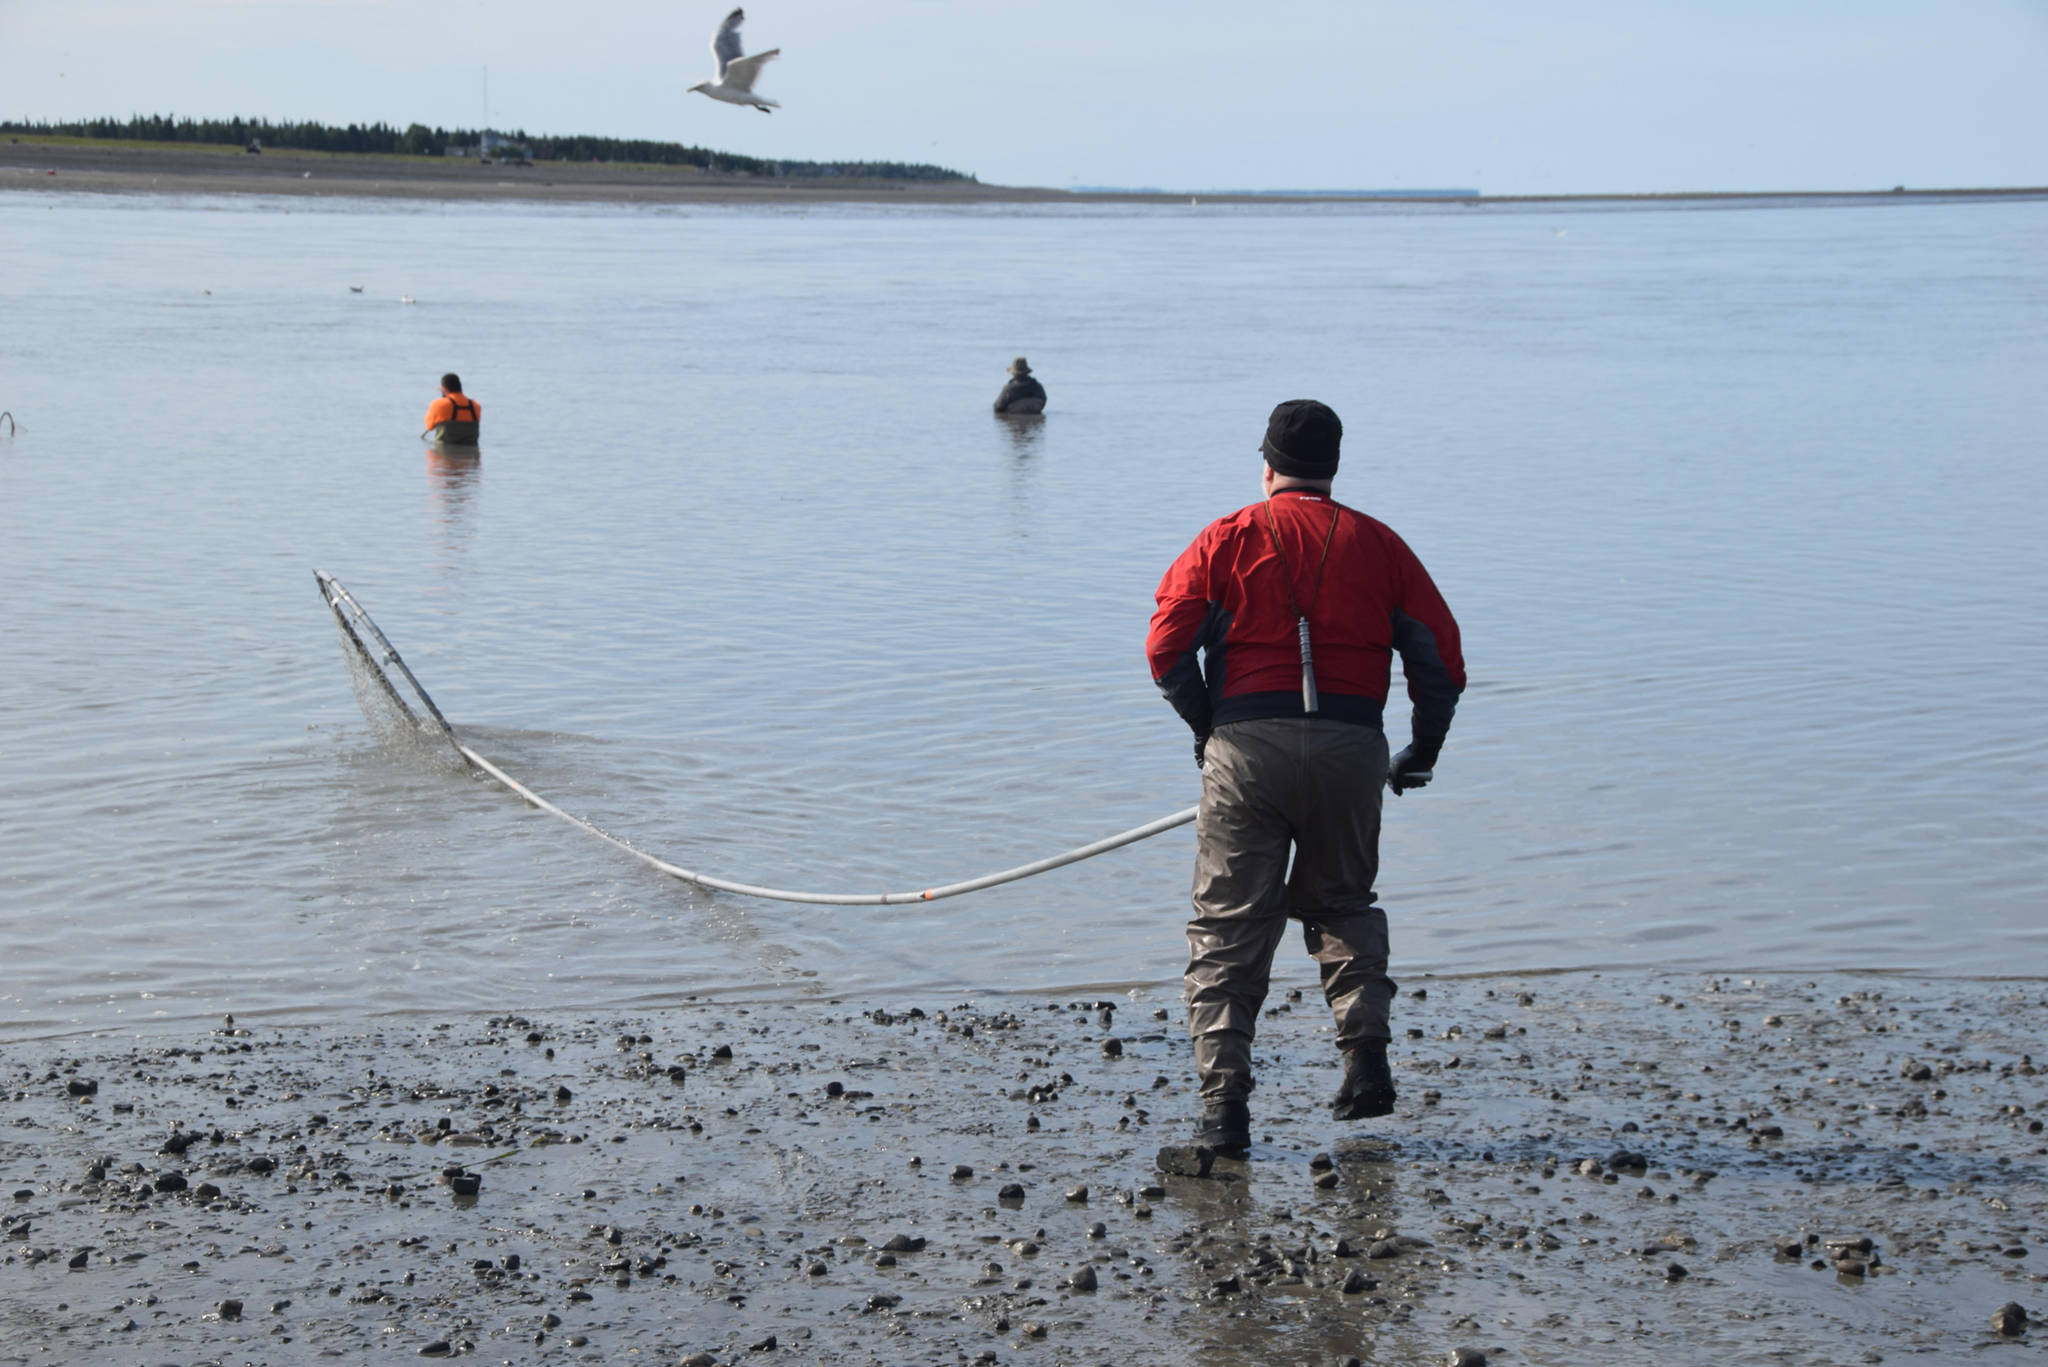 John Hakla from Eagle River heads back into the water while dipnetting on the North Kenai Beach on Wednesday, July 17, 2019. (Photo by Brian Mazurek/Peninsula Clarion)